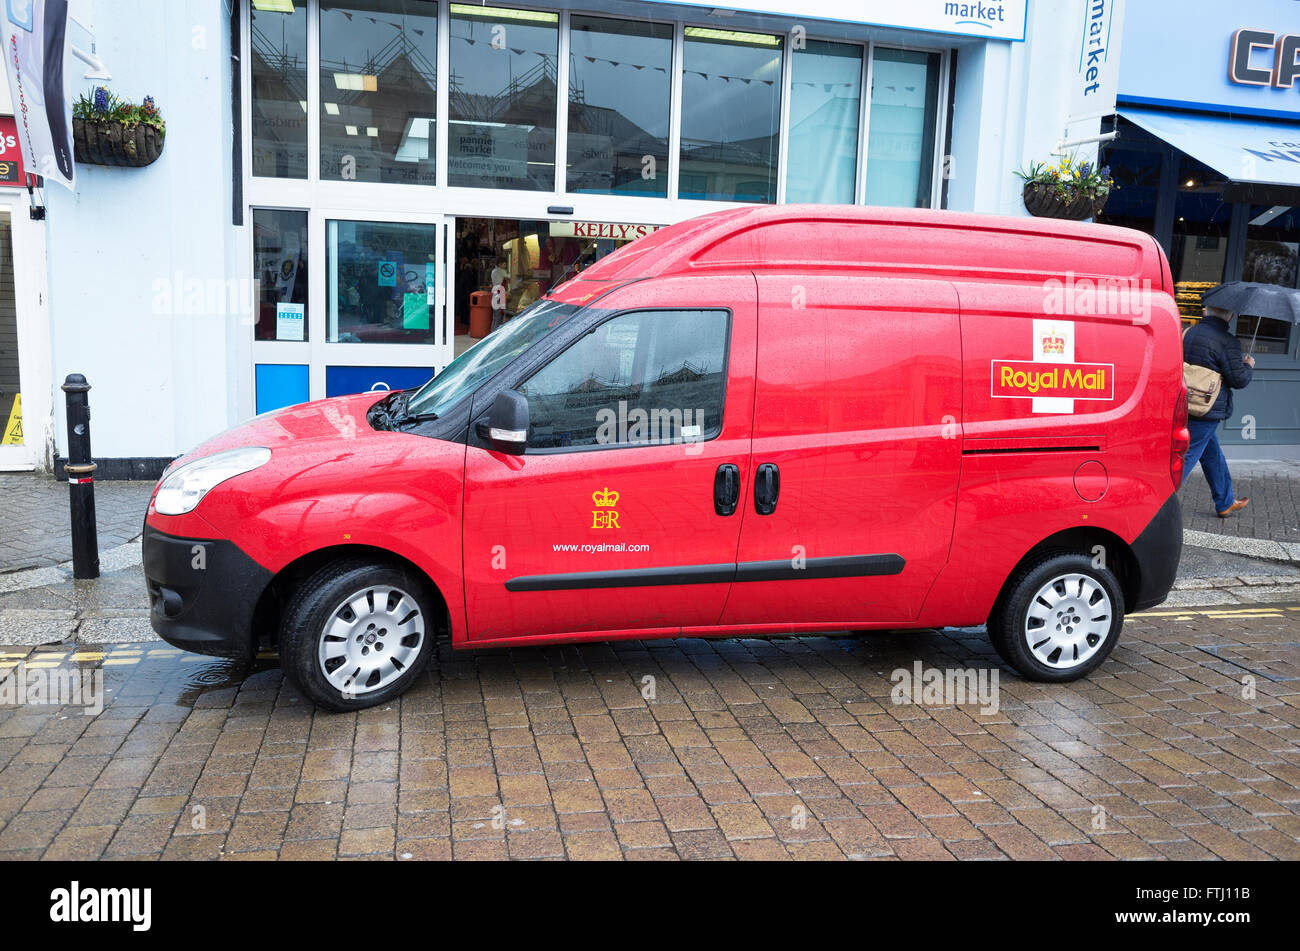 A Royal Mail delivery van Stock Photo